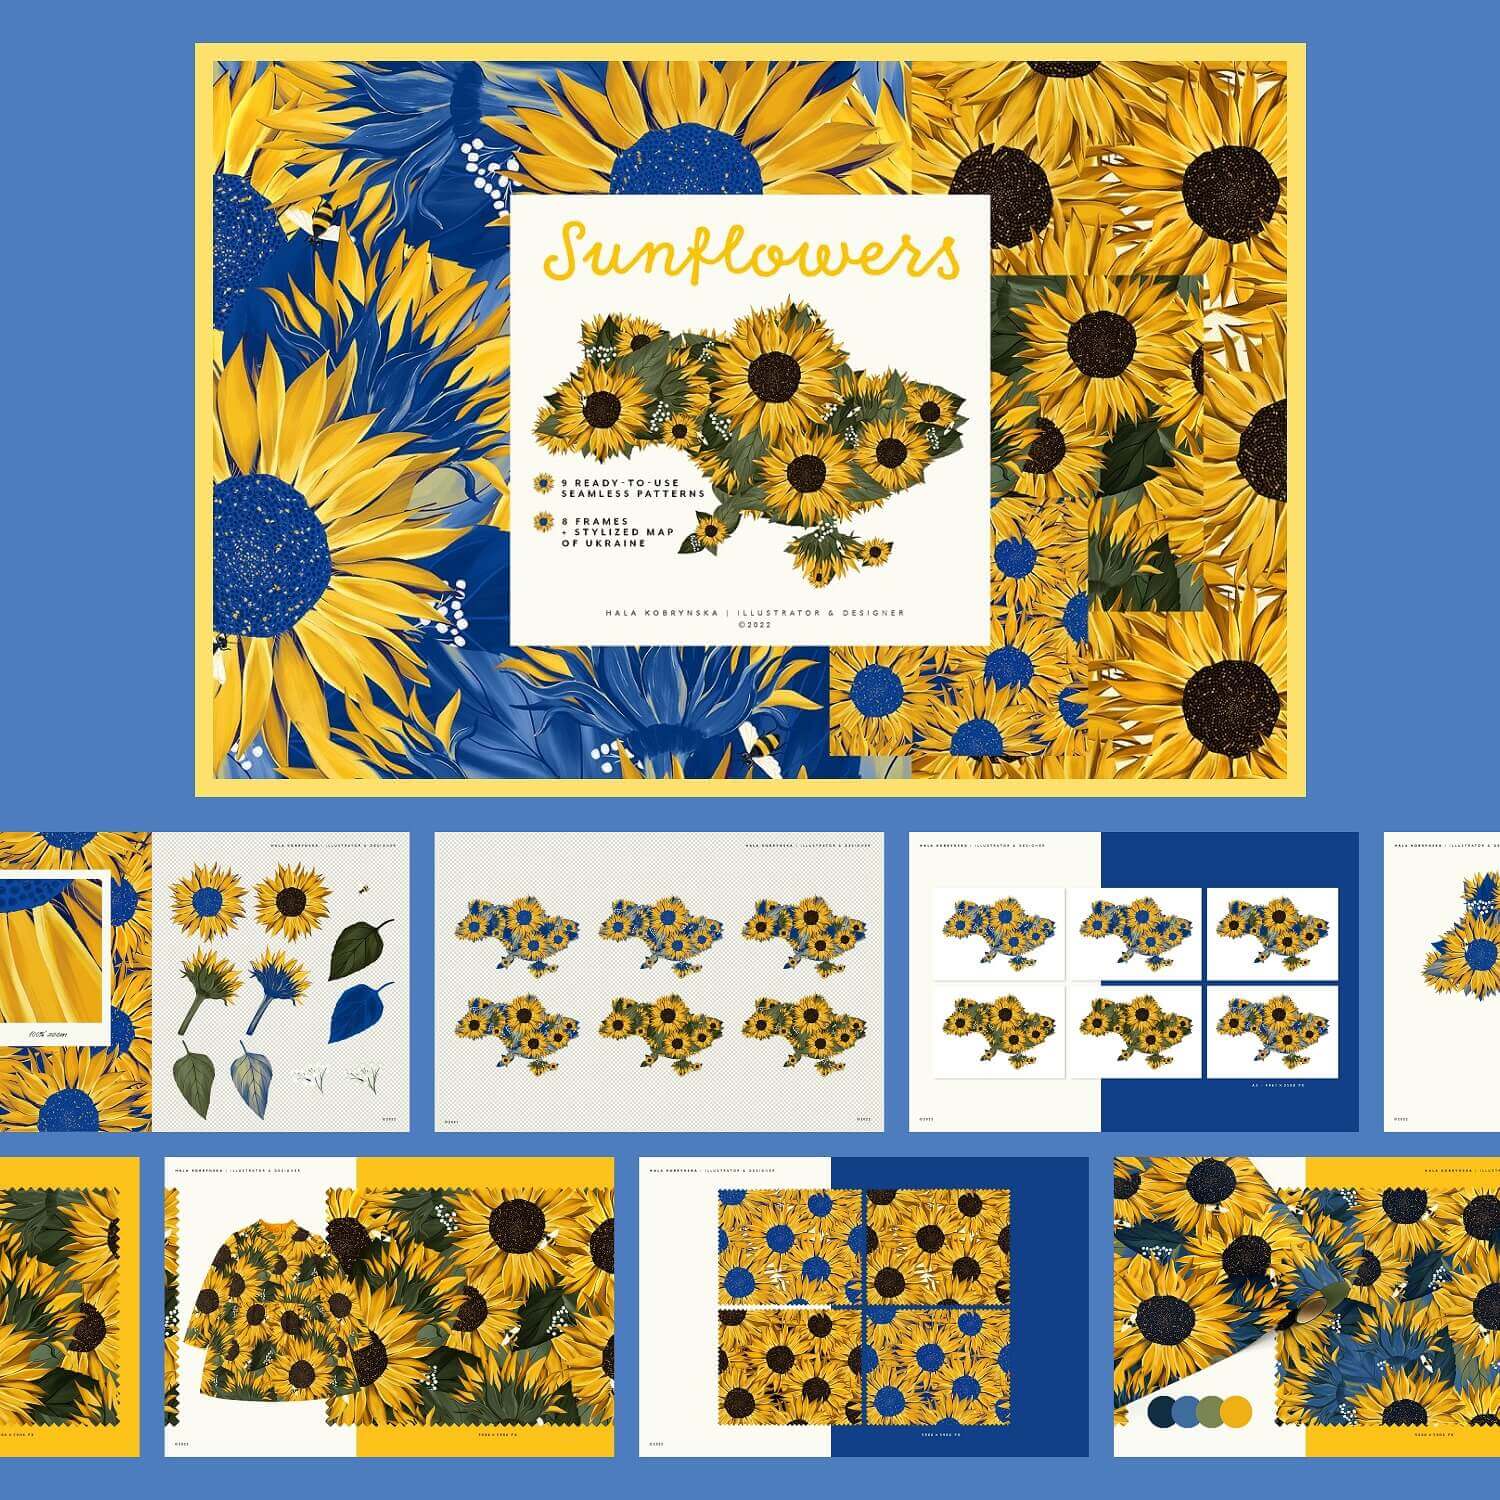 Image of a map of Ukraine with large sunflowers on a white background.